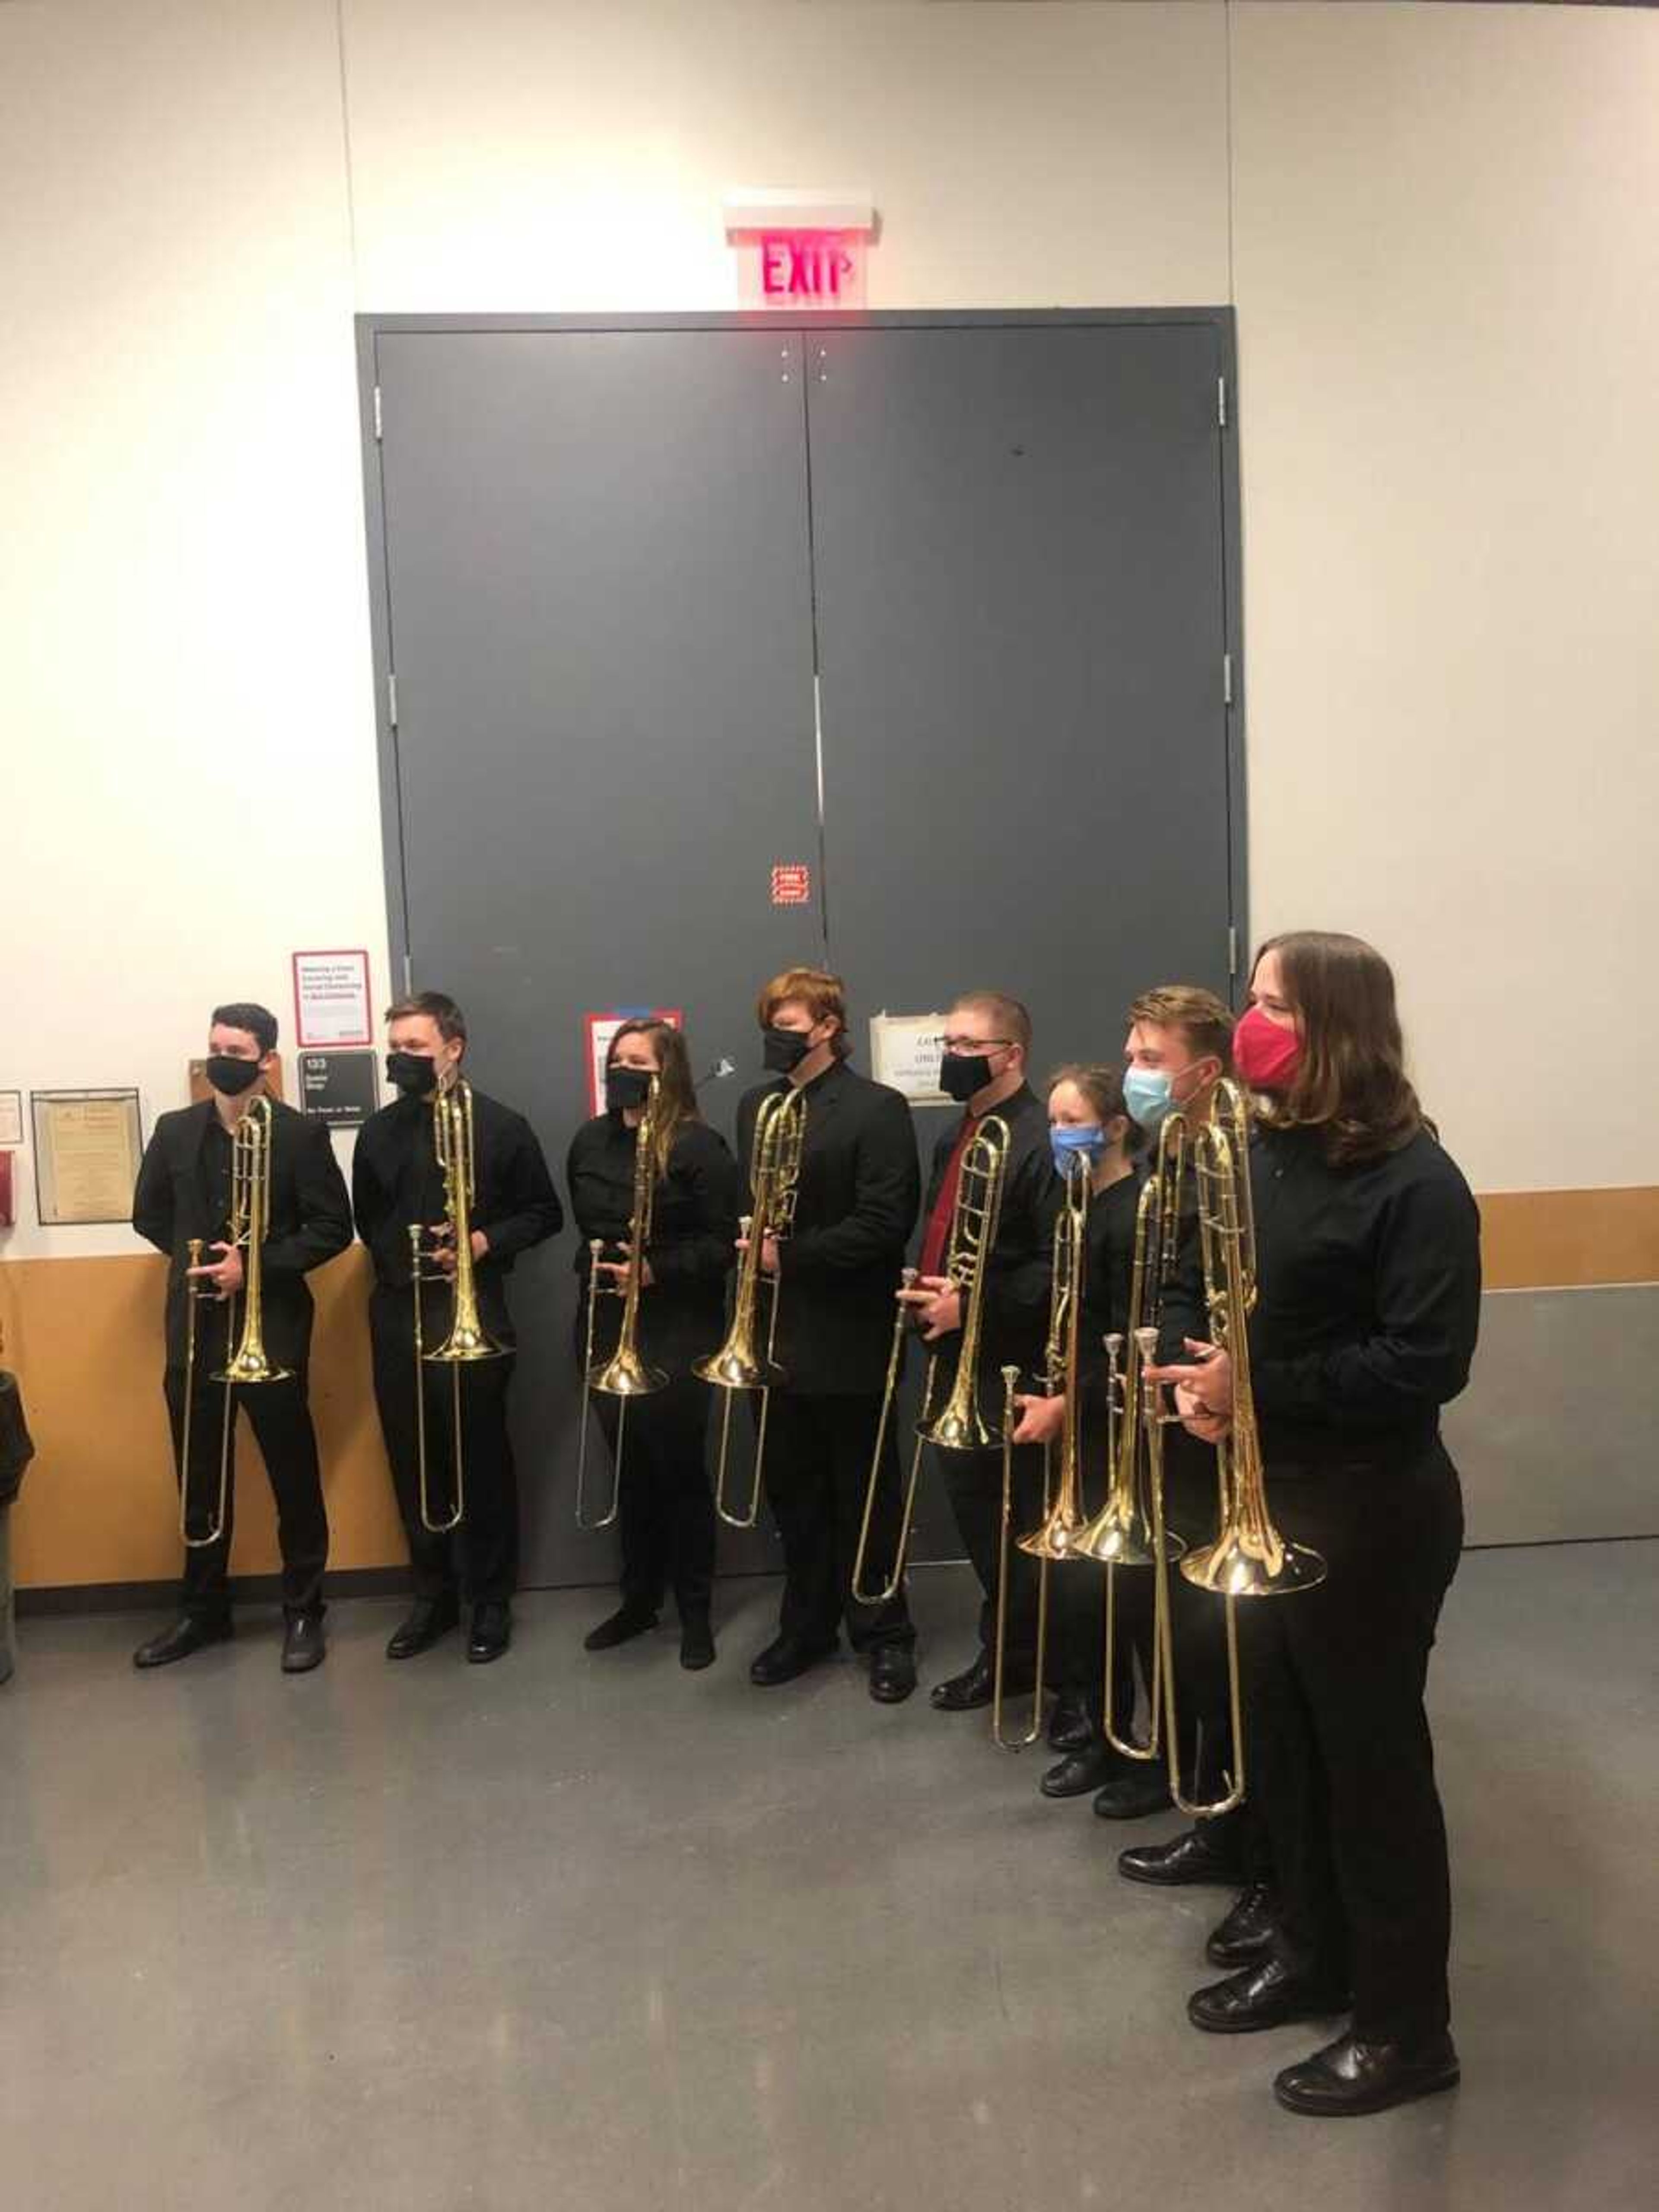 The Wind Symphony bass trombone players come together to take a picture at the end of their Series II concert.